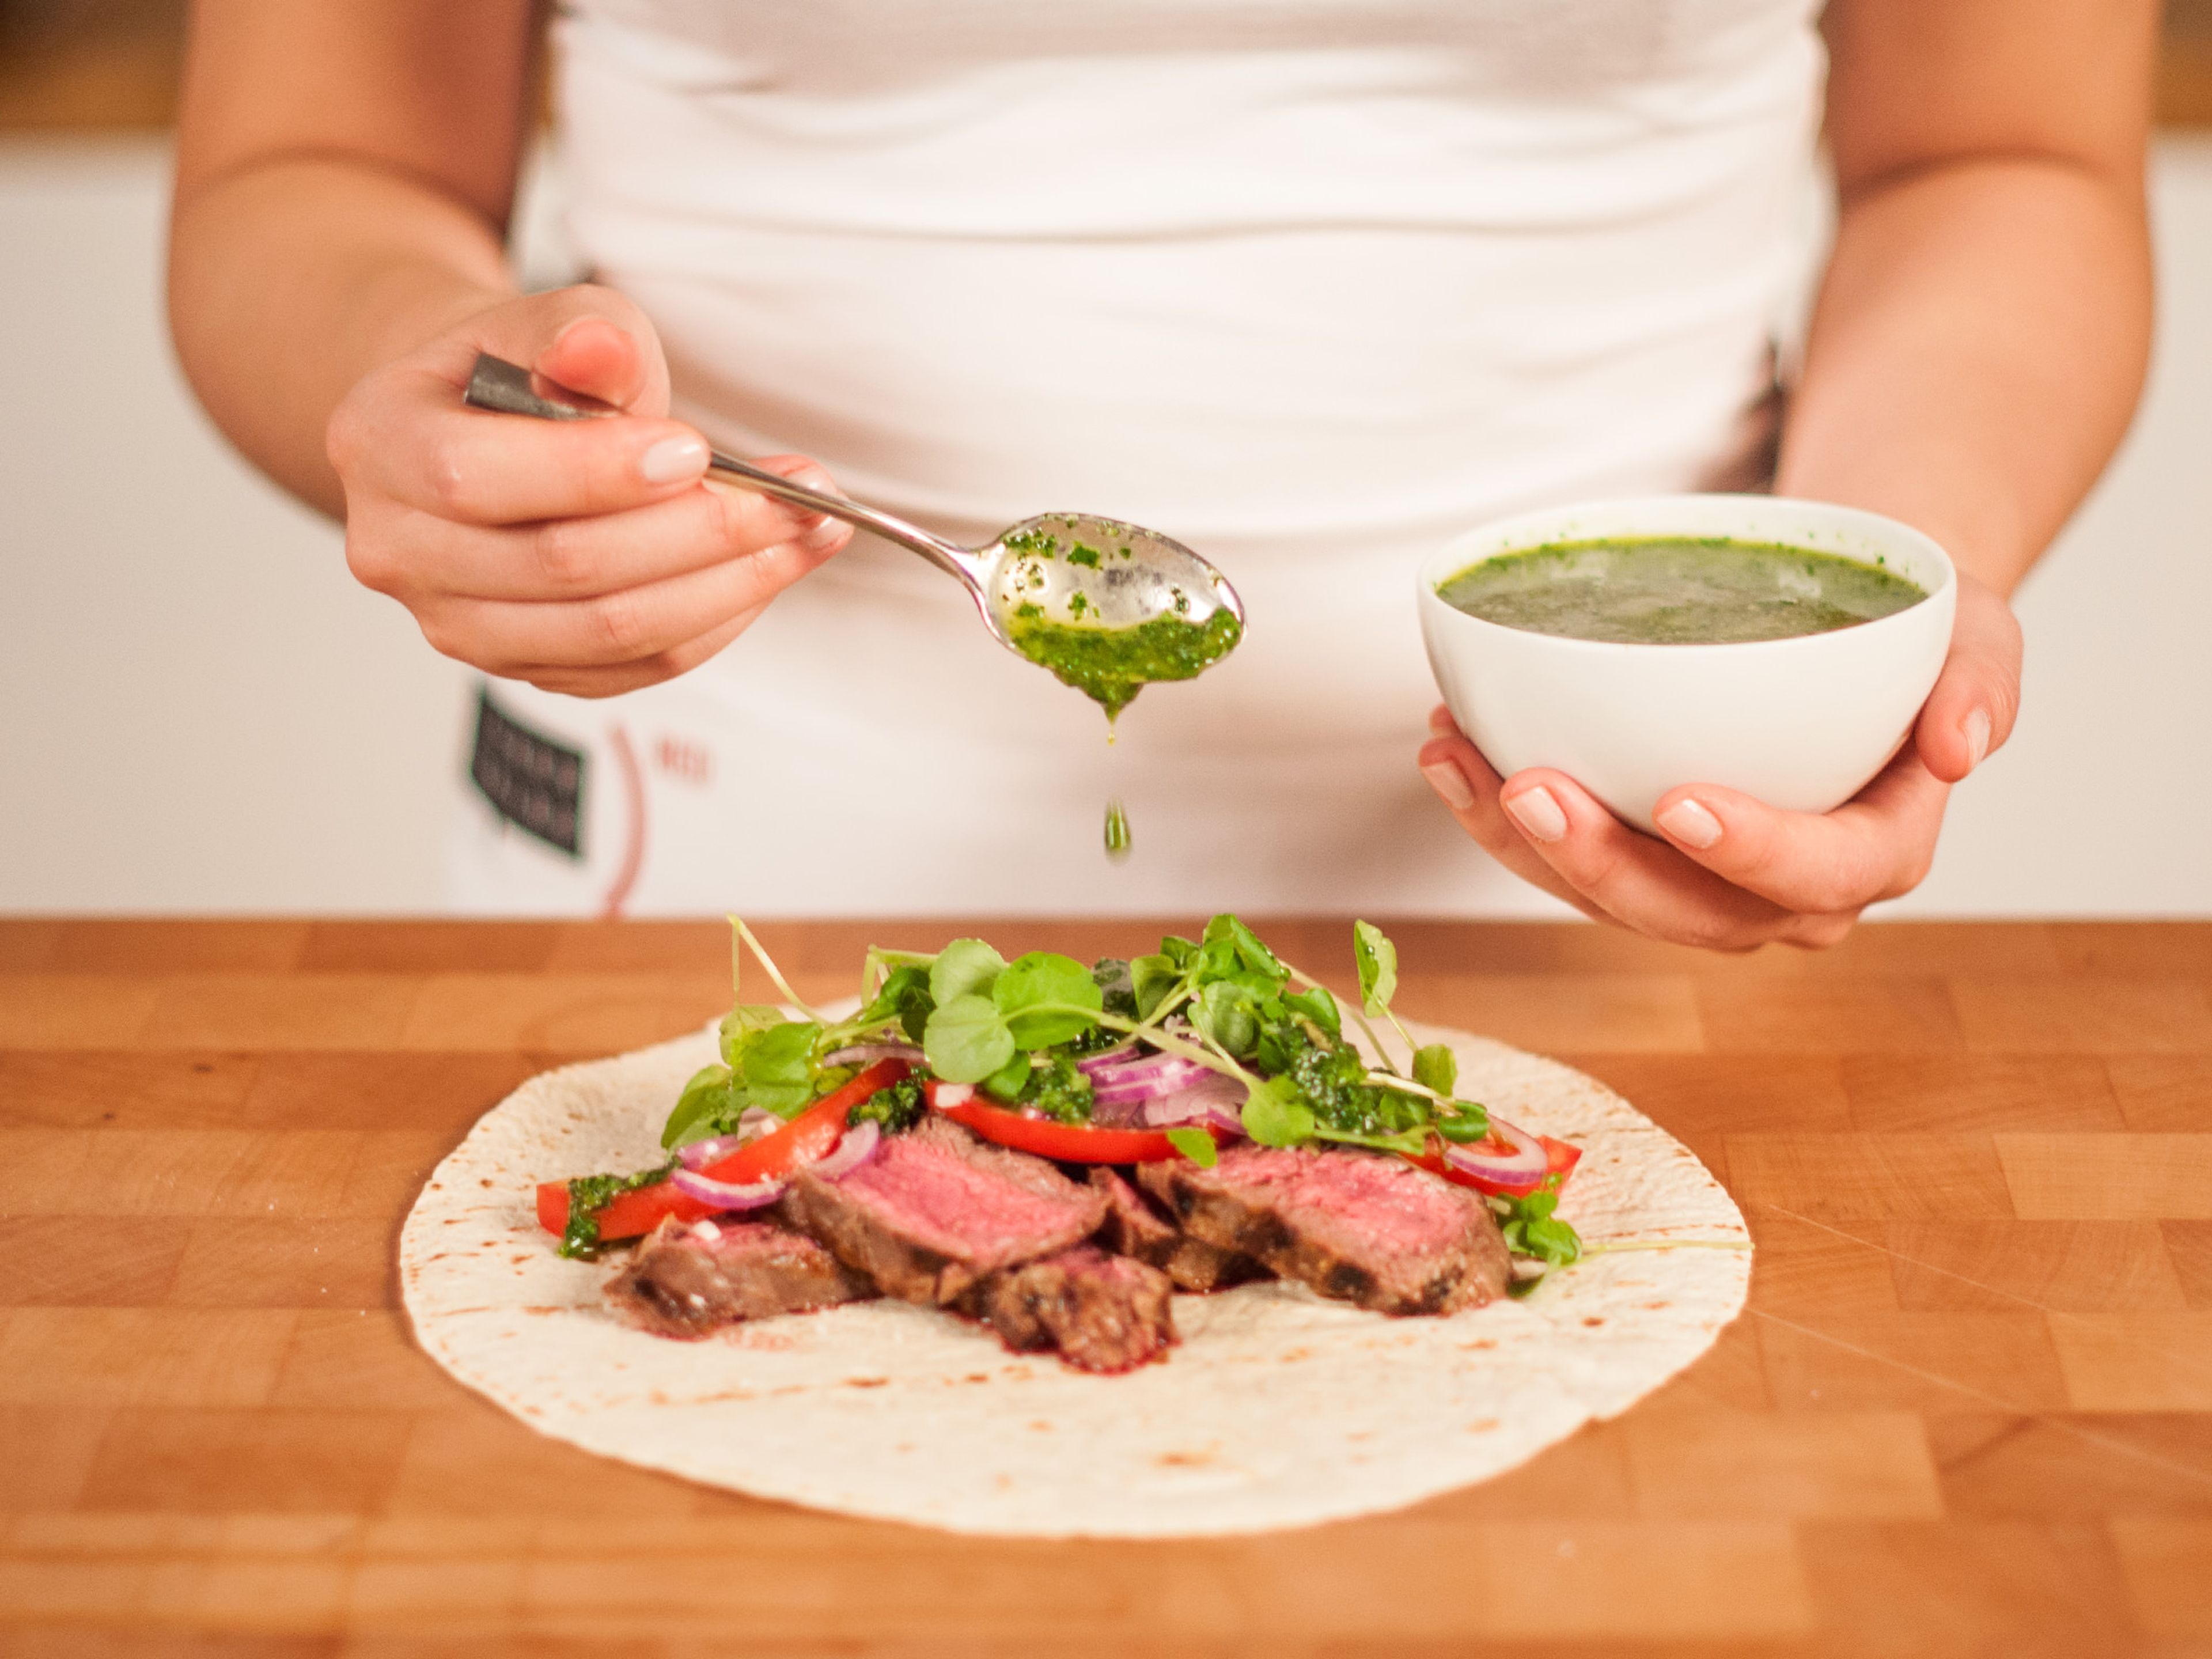 Place sliced skirt steak on a tortilla. Add sliced tomato, sliced onion, and watercress. Then, drizzle with chimichurri. Fold and serve with more chimichurri.